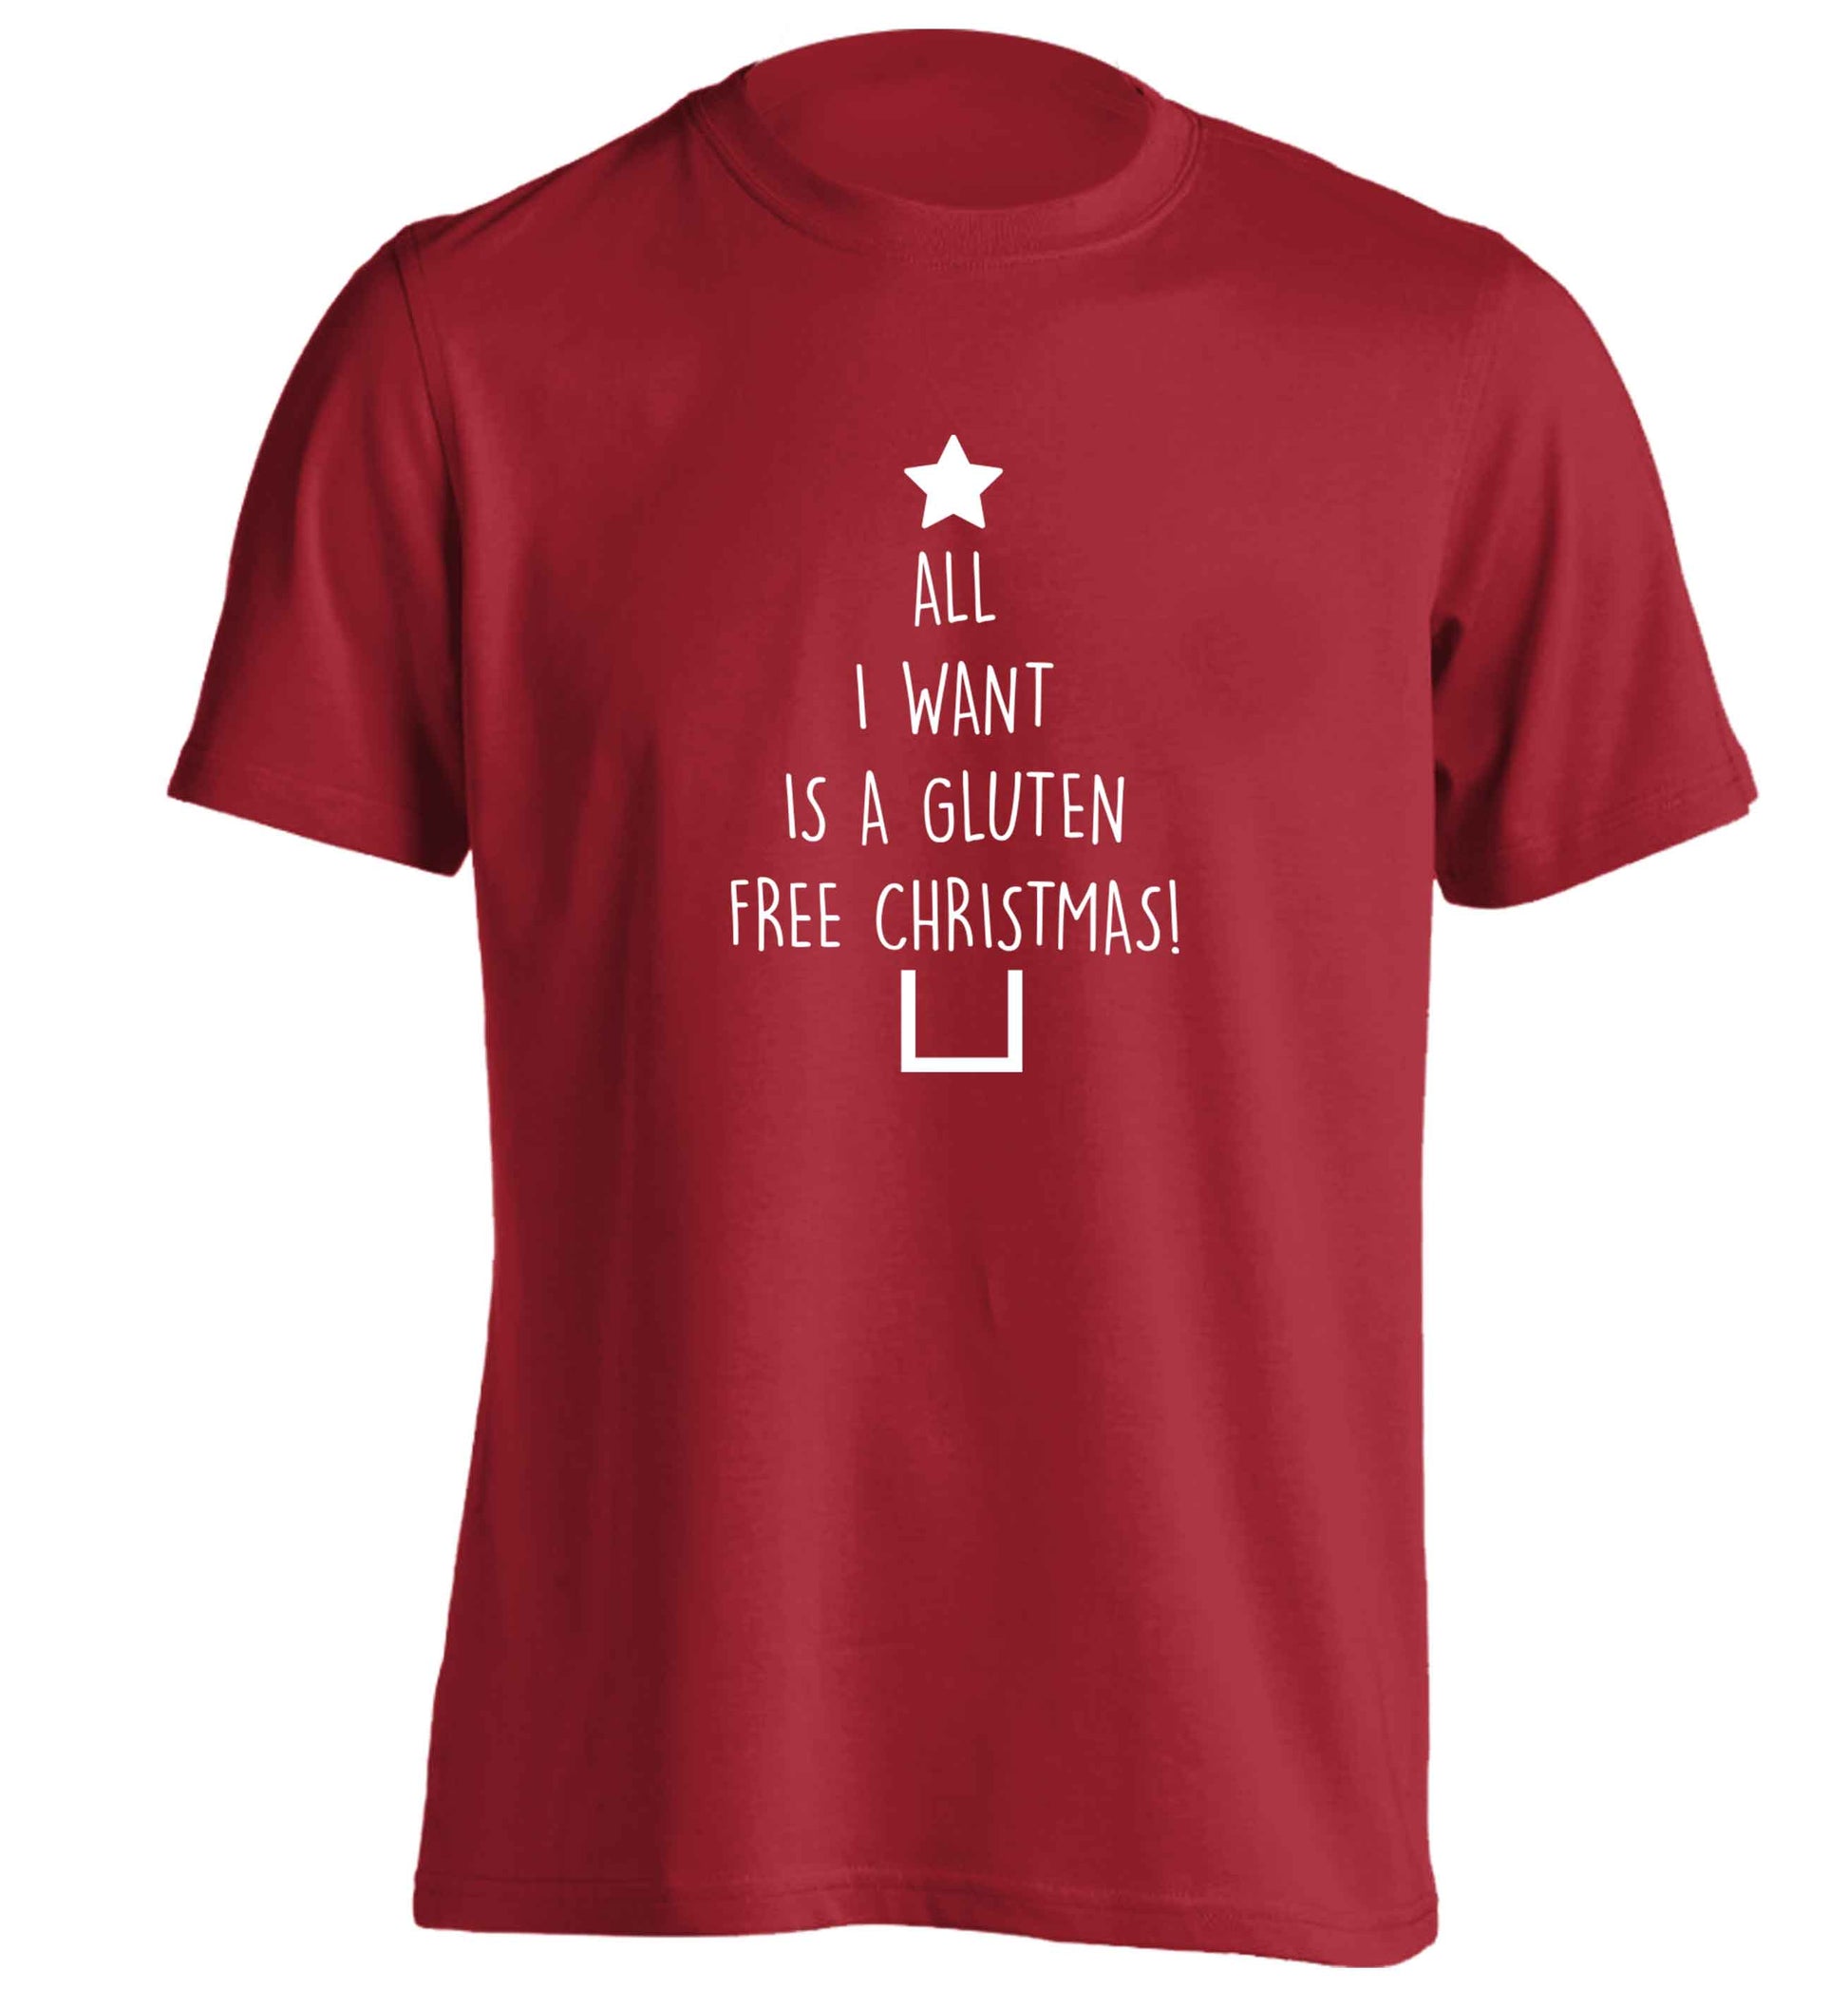 All I want is a gluten free Christmas adults unisex red Tshirt 2XL